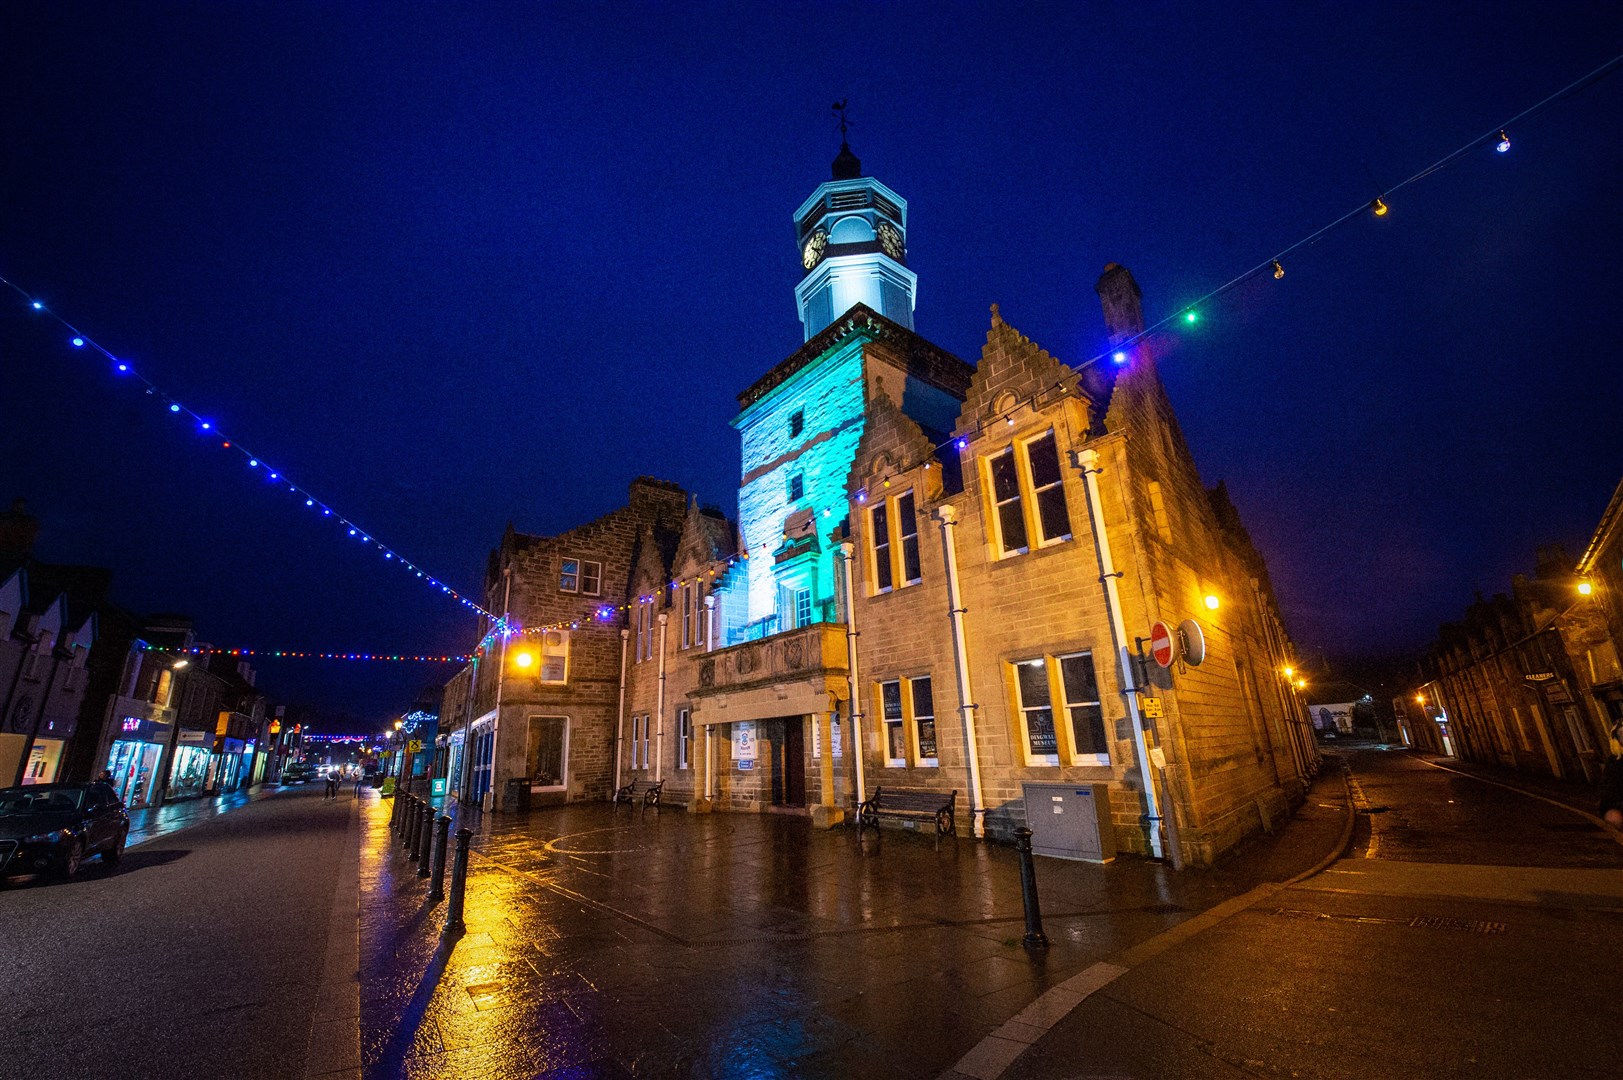 While there won't be a set-piece Christmas lights switch-on this year because of Covid-19 restrictions, Dingwall hopes the gradual appearance of lights in the coming weeks will be a sign of better times ahead. Picture: Callum Mackay